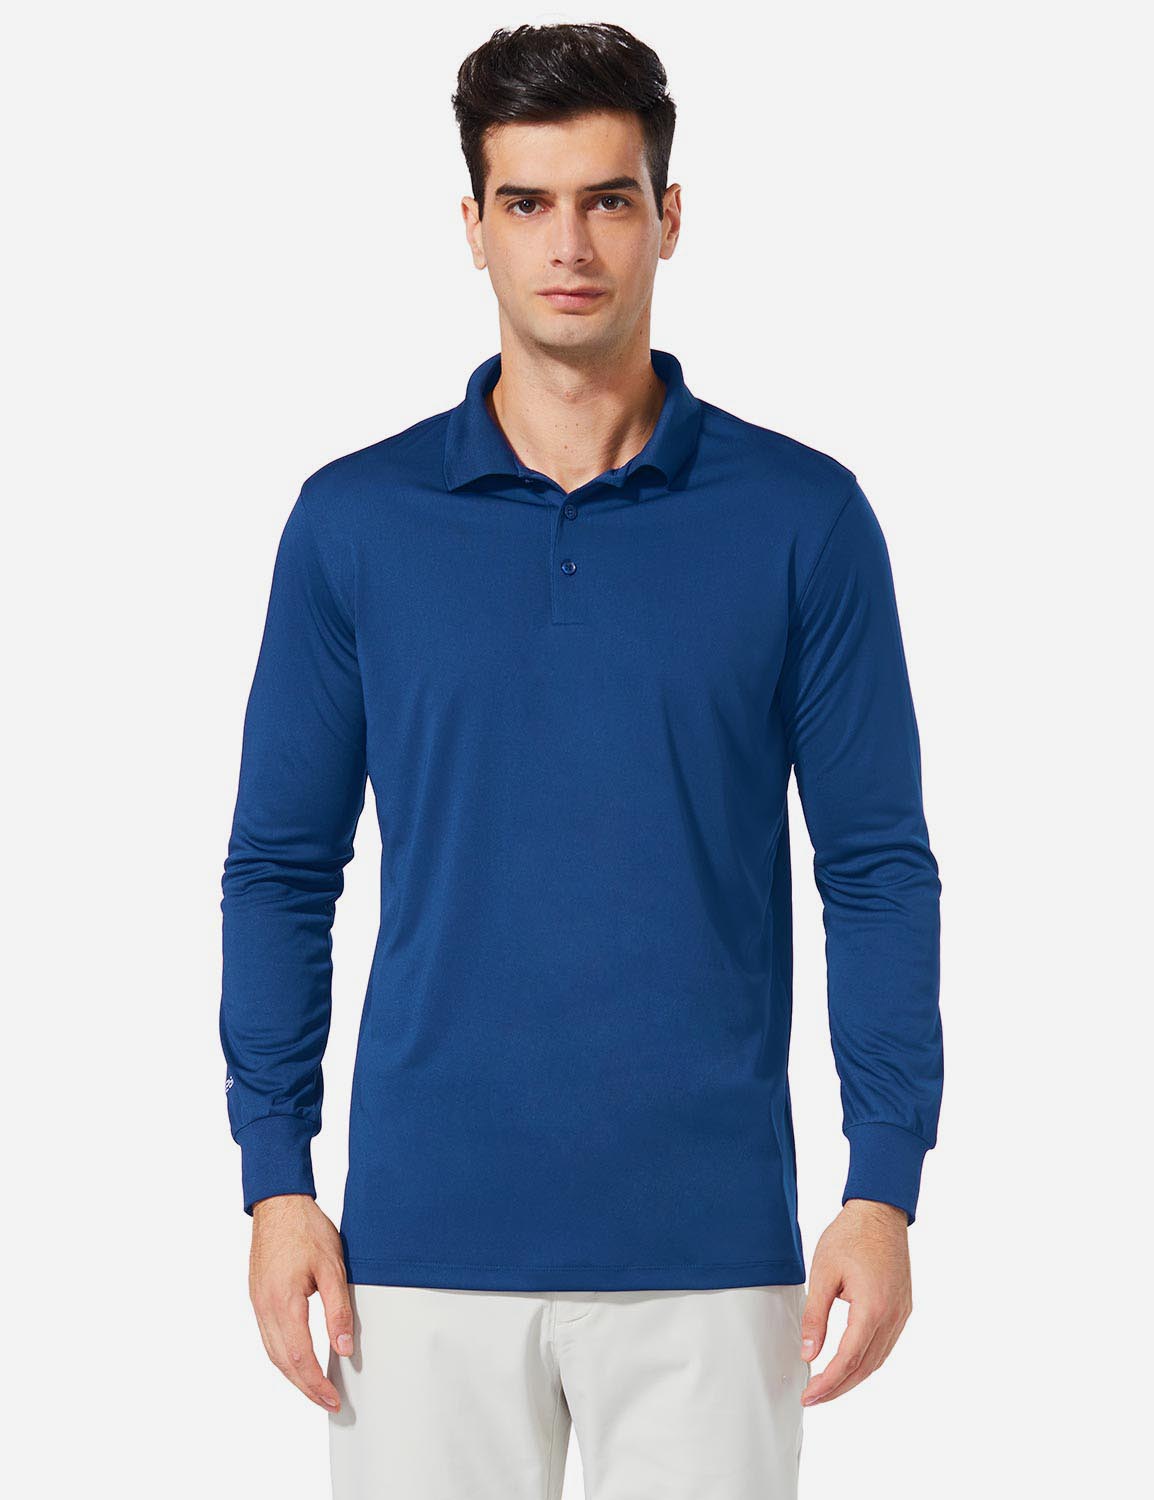 Baleaf Mens UPF50+ Button Up Long Sleeved Cuffed Polo Golf afa002 Royal Blue Front